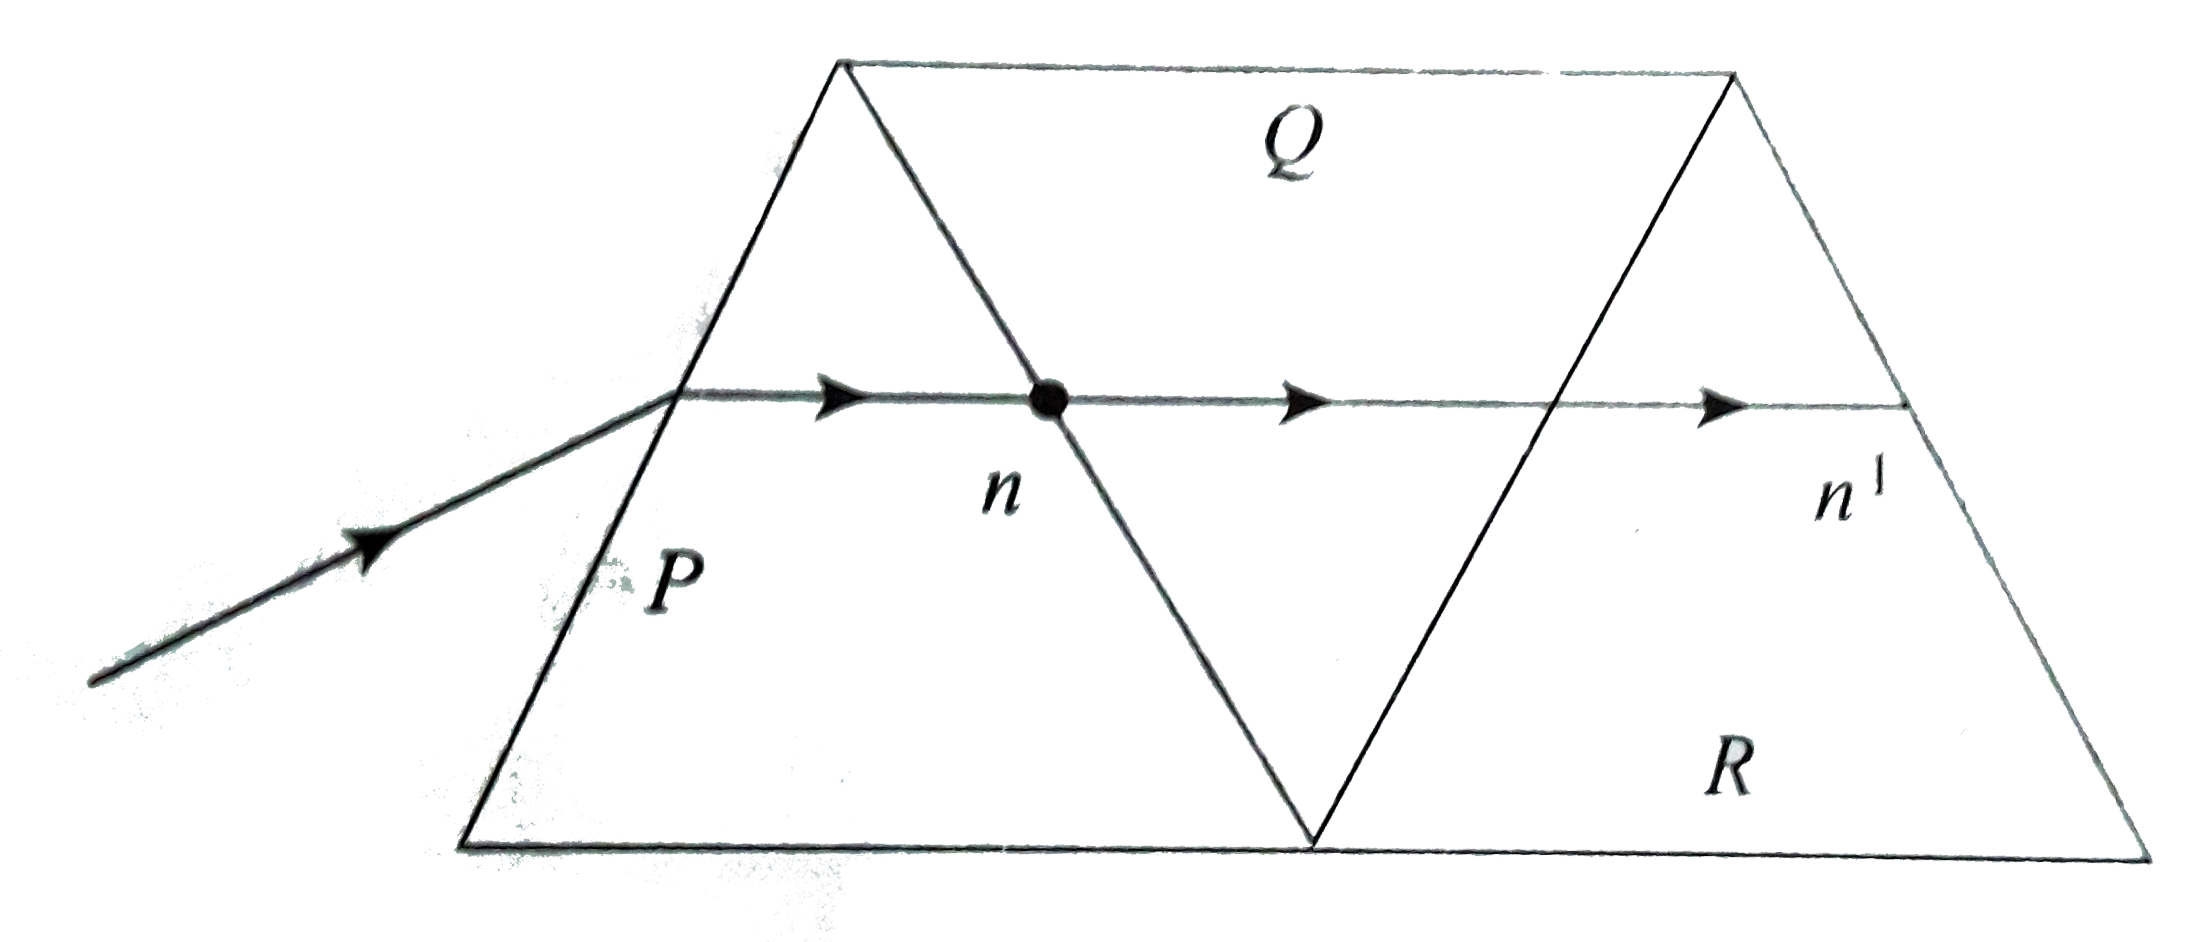 A given ray of light suffers minimum deviation in an equilateral prism P. Additional prism Q and R of identical shape and of the same material as P are now added as shown in figure. The ray will now suffer